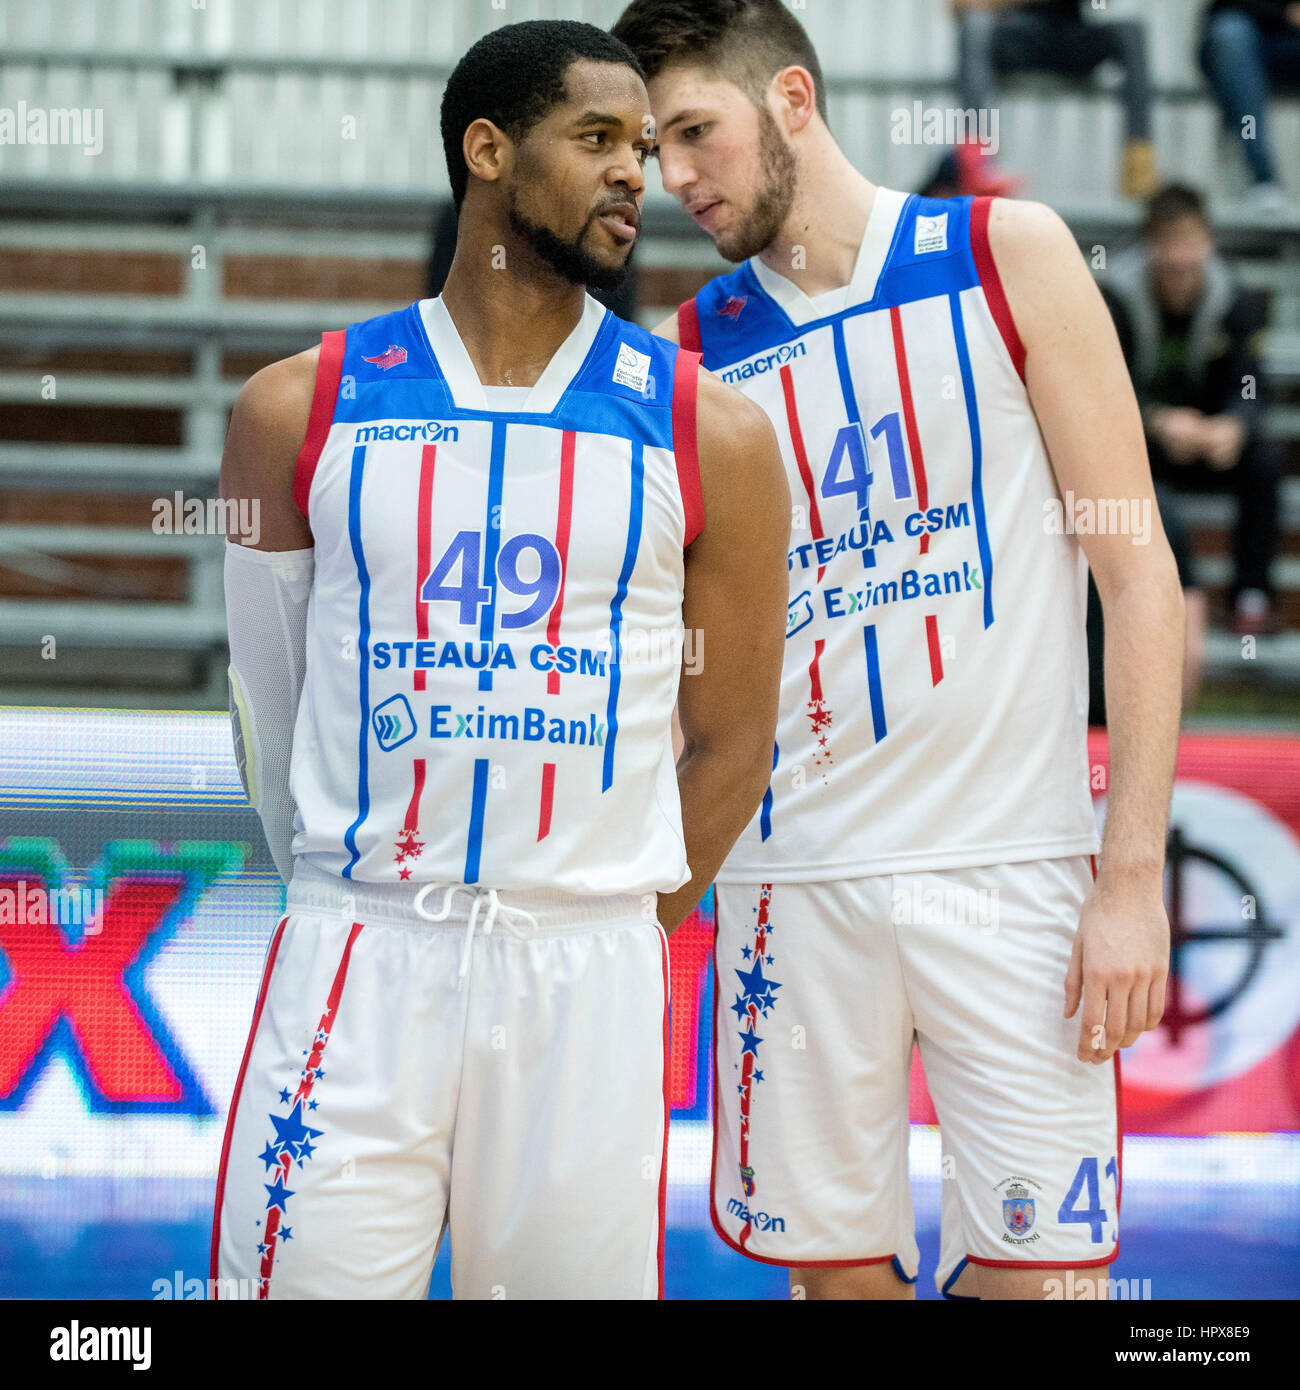 March 4, 2016: Porter Troupe #49 of Steaua CSM EximBank Bucharest L and  Bogdan Popa #41 of Steaua CSM EximBank Bucharest during the LNBM - Men's  National Basketball League Romania game between